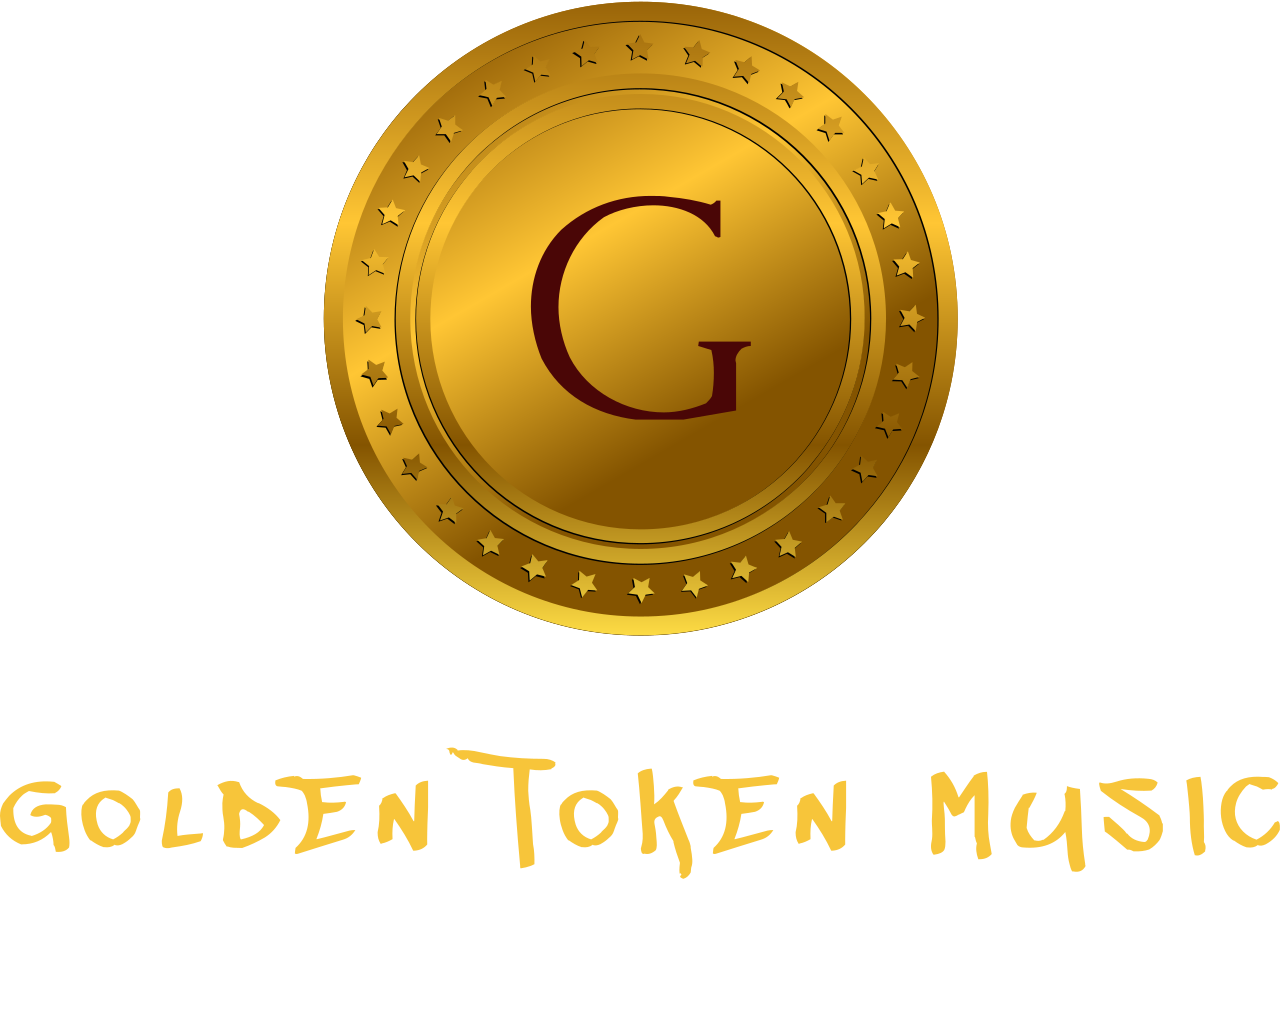 GOLDEN TOKEN MUSIC's web page